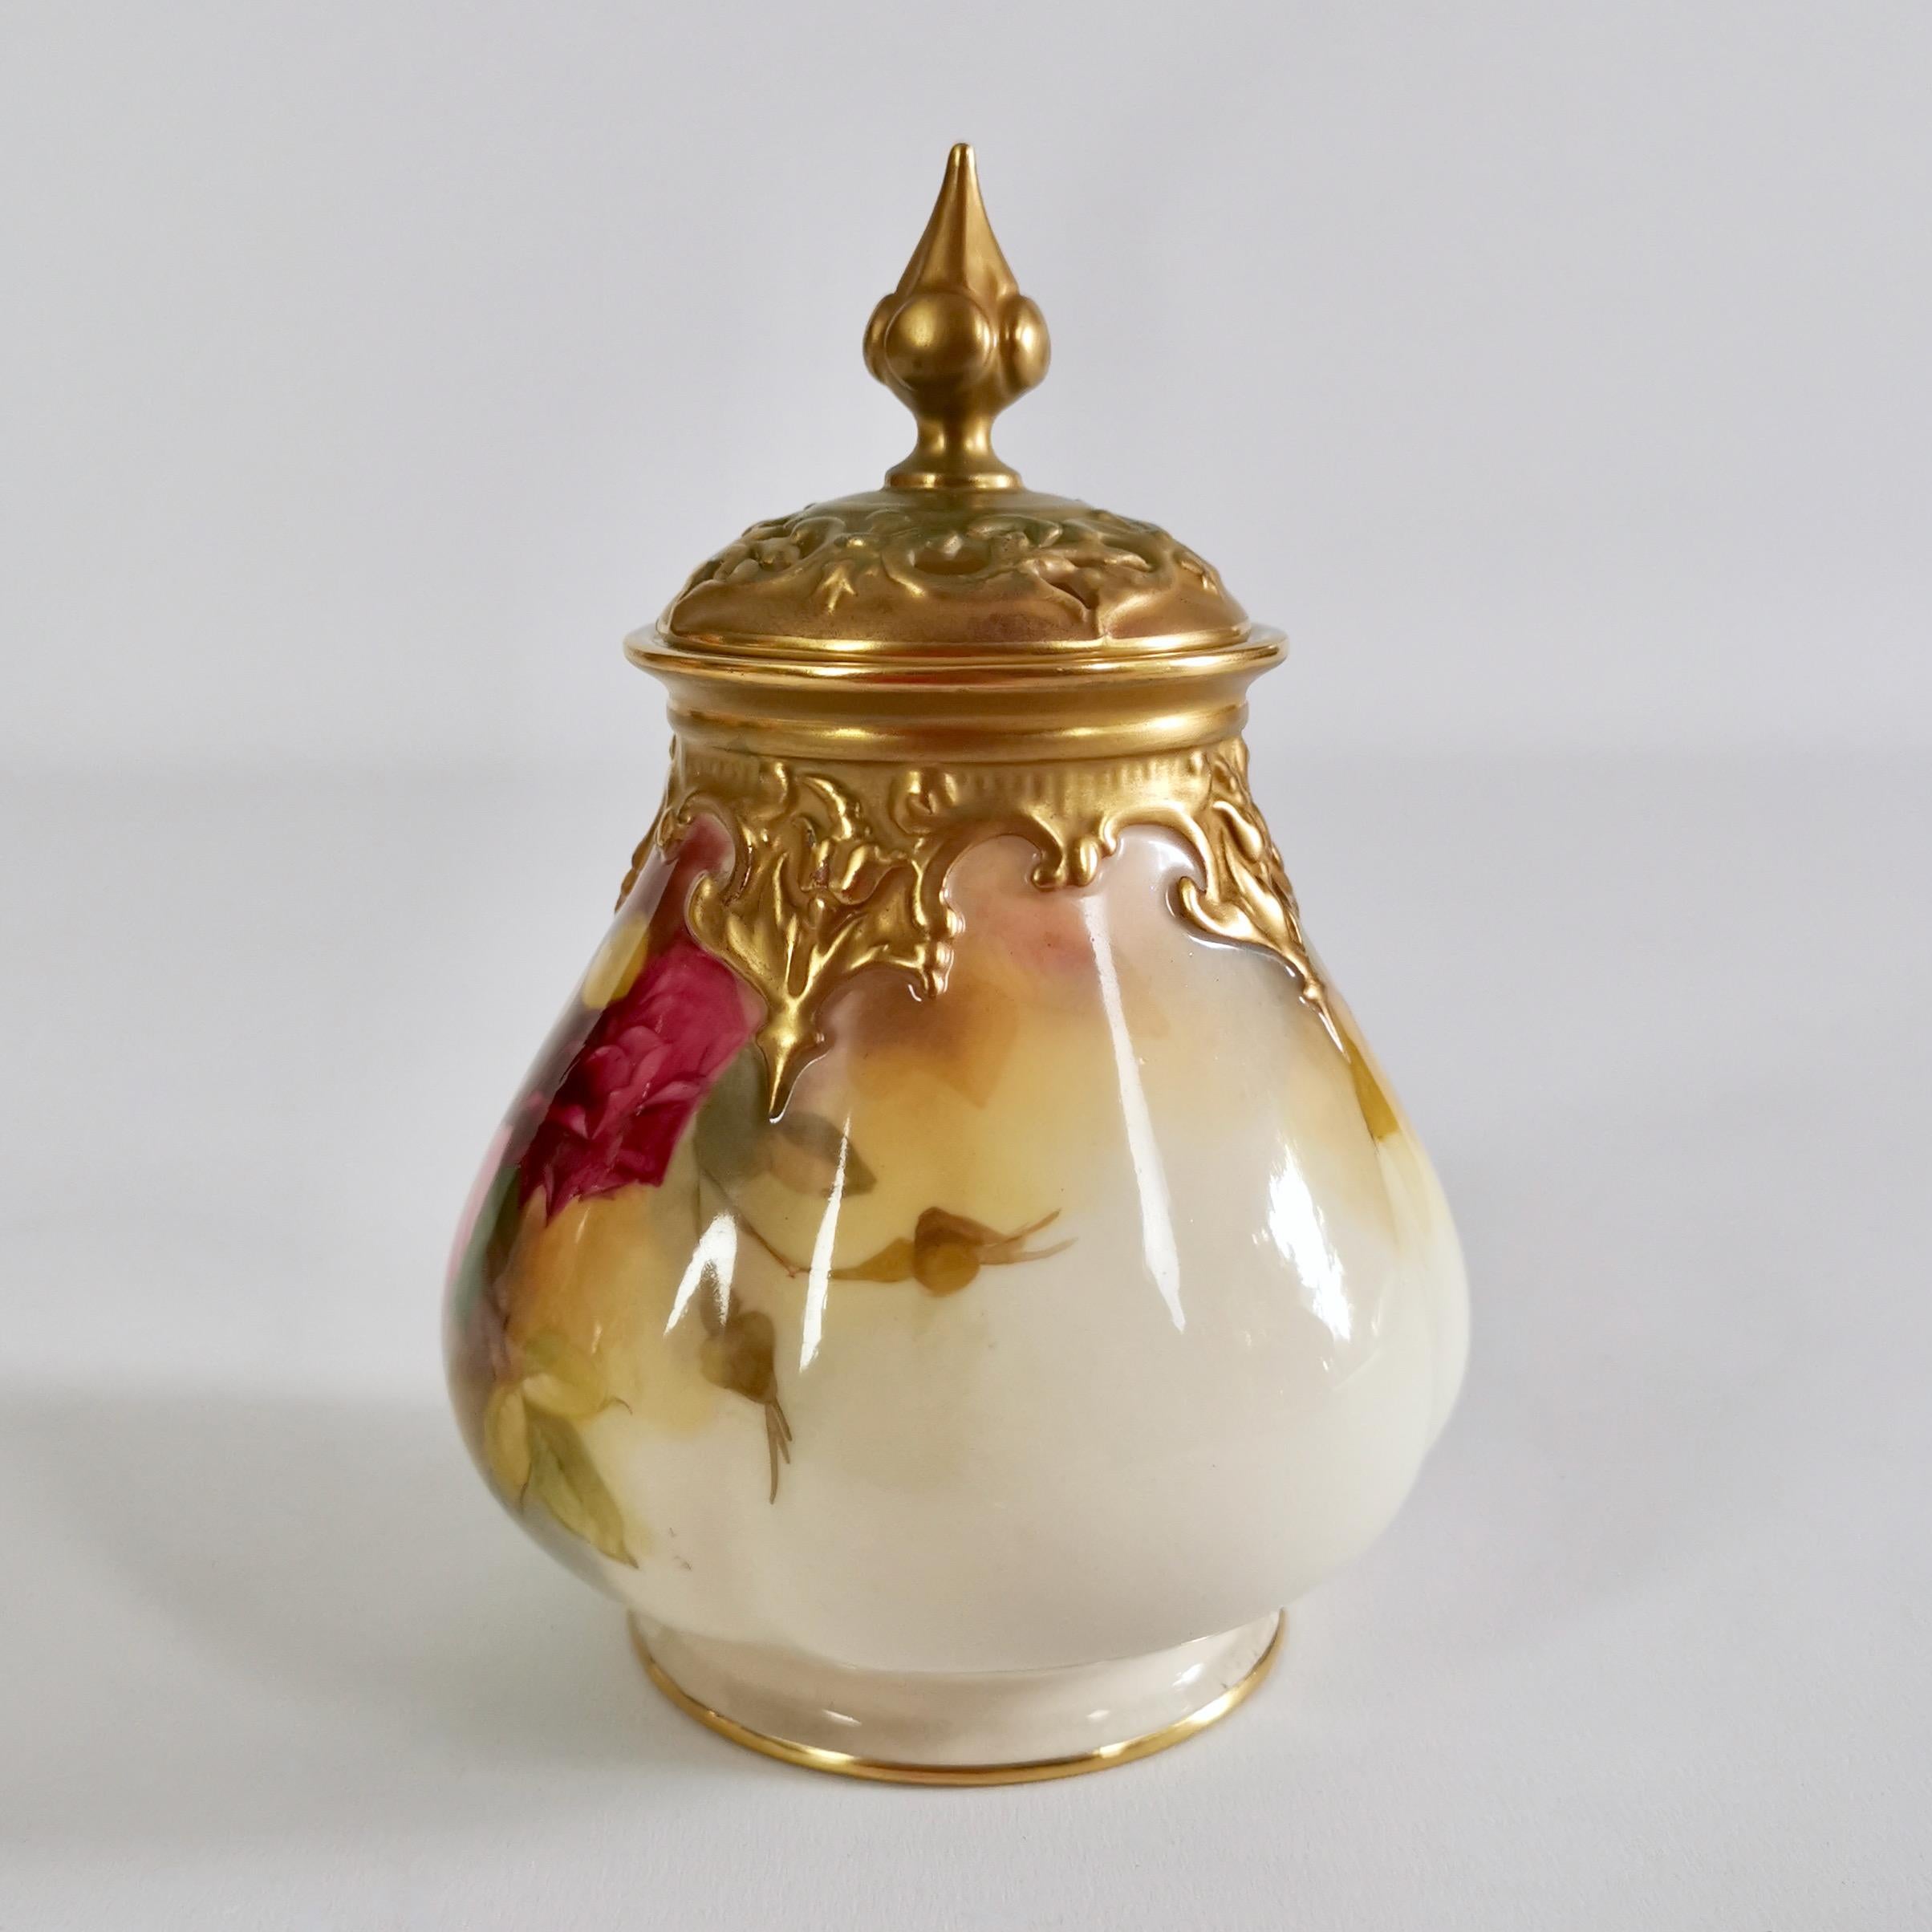 This is a very fine small potpourri vase and cover made by Royal Worcester in 1923. The urn has a blush ivory ground with exceptionally beautiful hand painted Hadley roses.

Potpourri vases were meant to hold a mix of scented dried flowers and